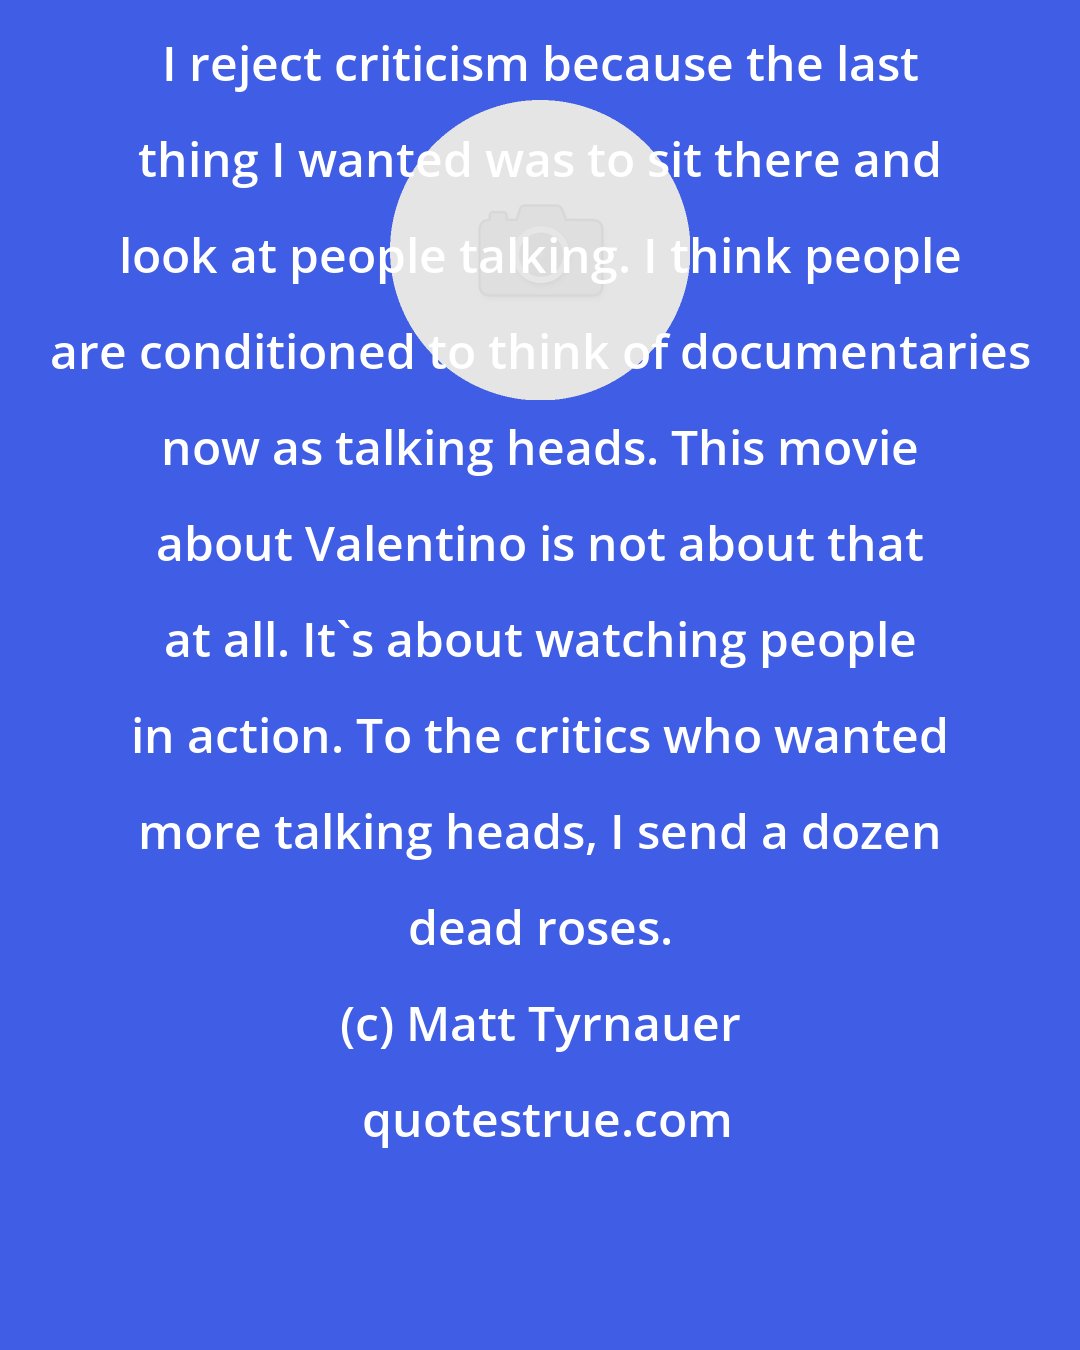 Matt Tyrnauer: I reject criticism because the last thing I wanted was to sit there and look at people talking. I think people are conditioned to think of documentaries now as talking heads. This movie about Valentino is not about that at all. It's about watching people in action. To the critics who wanted more talking heads, I send a dozen dead roses.